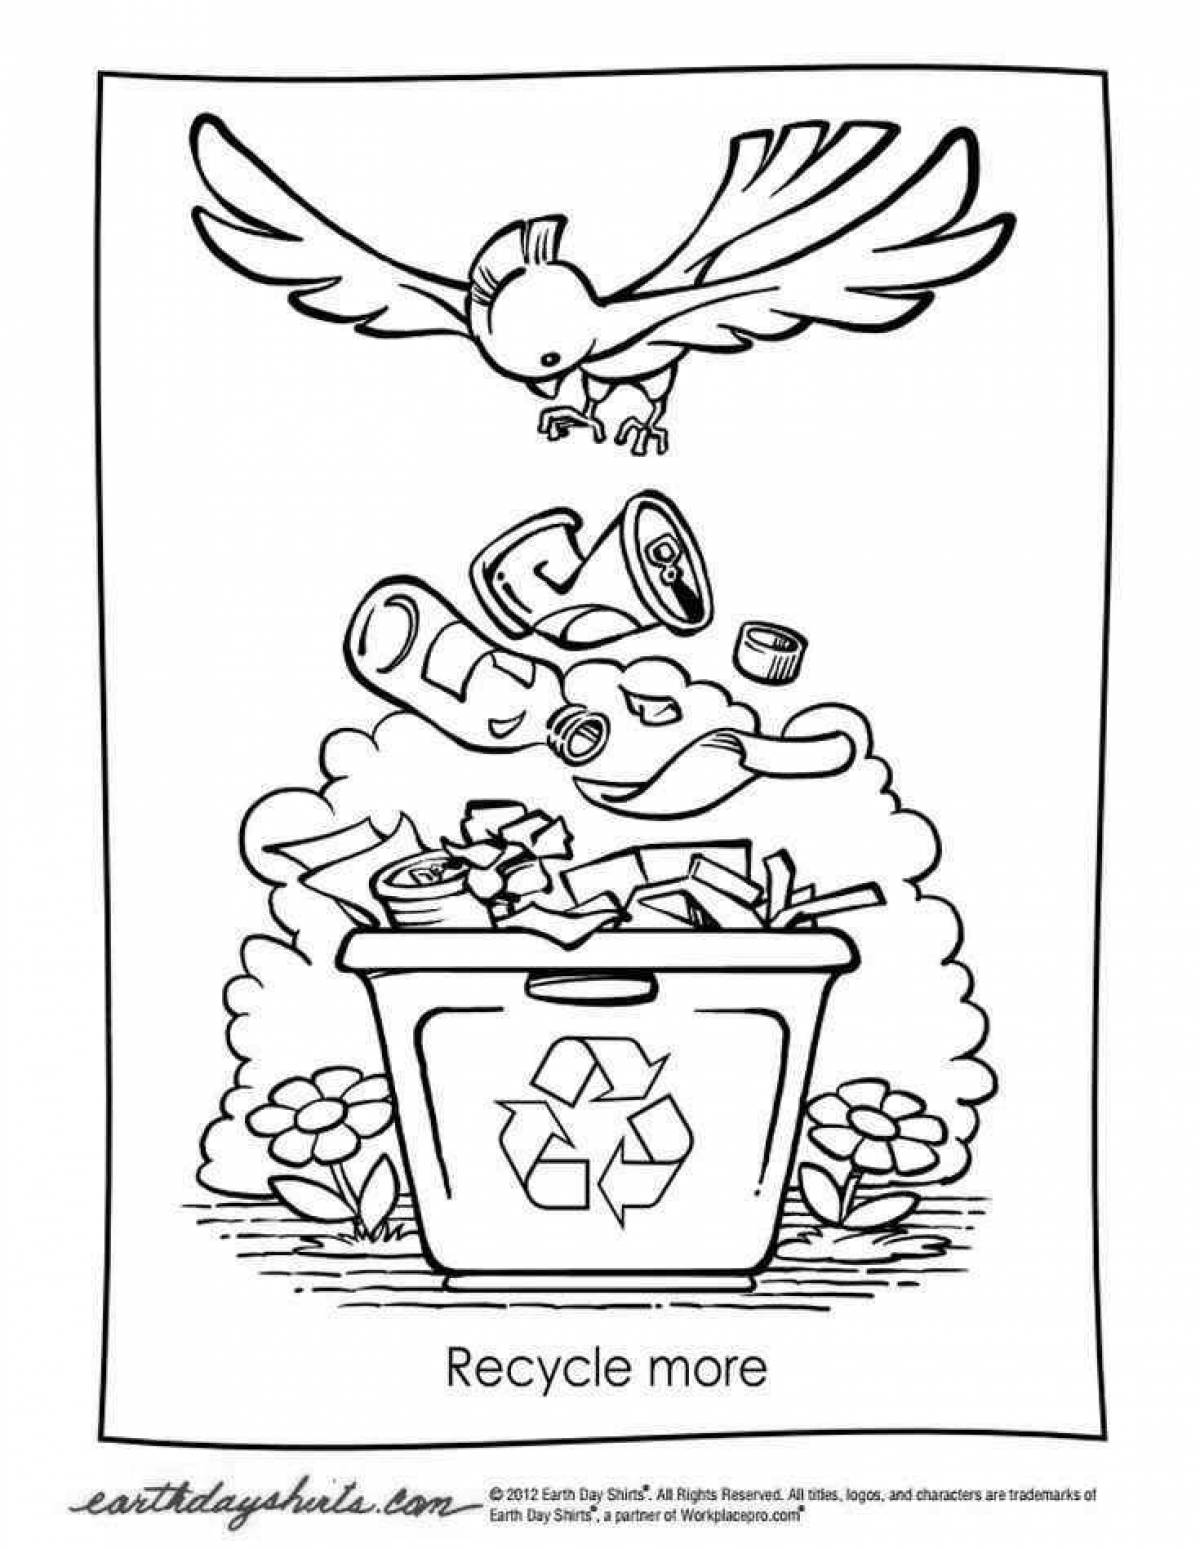 Royal ecology coloring page